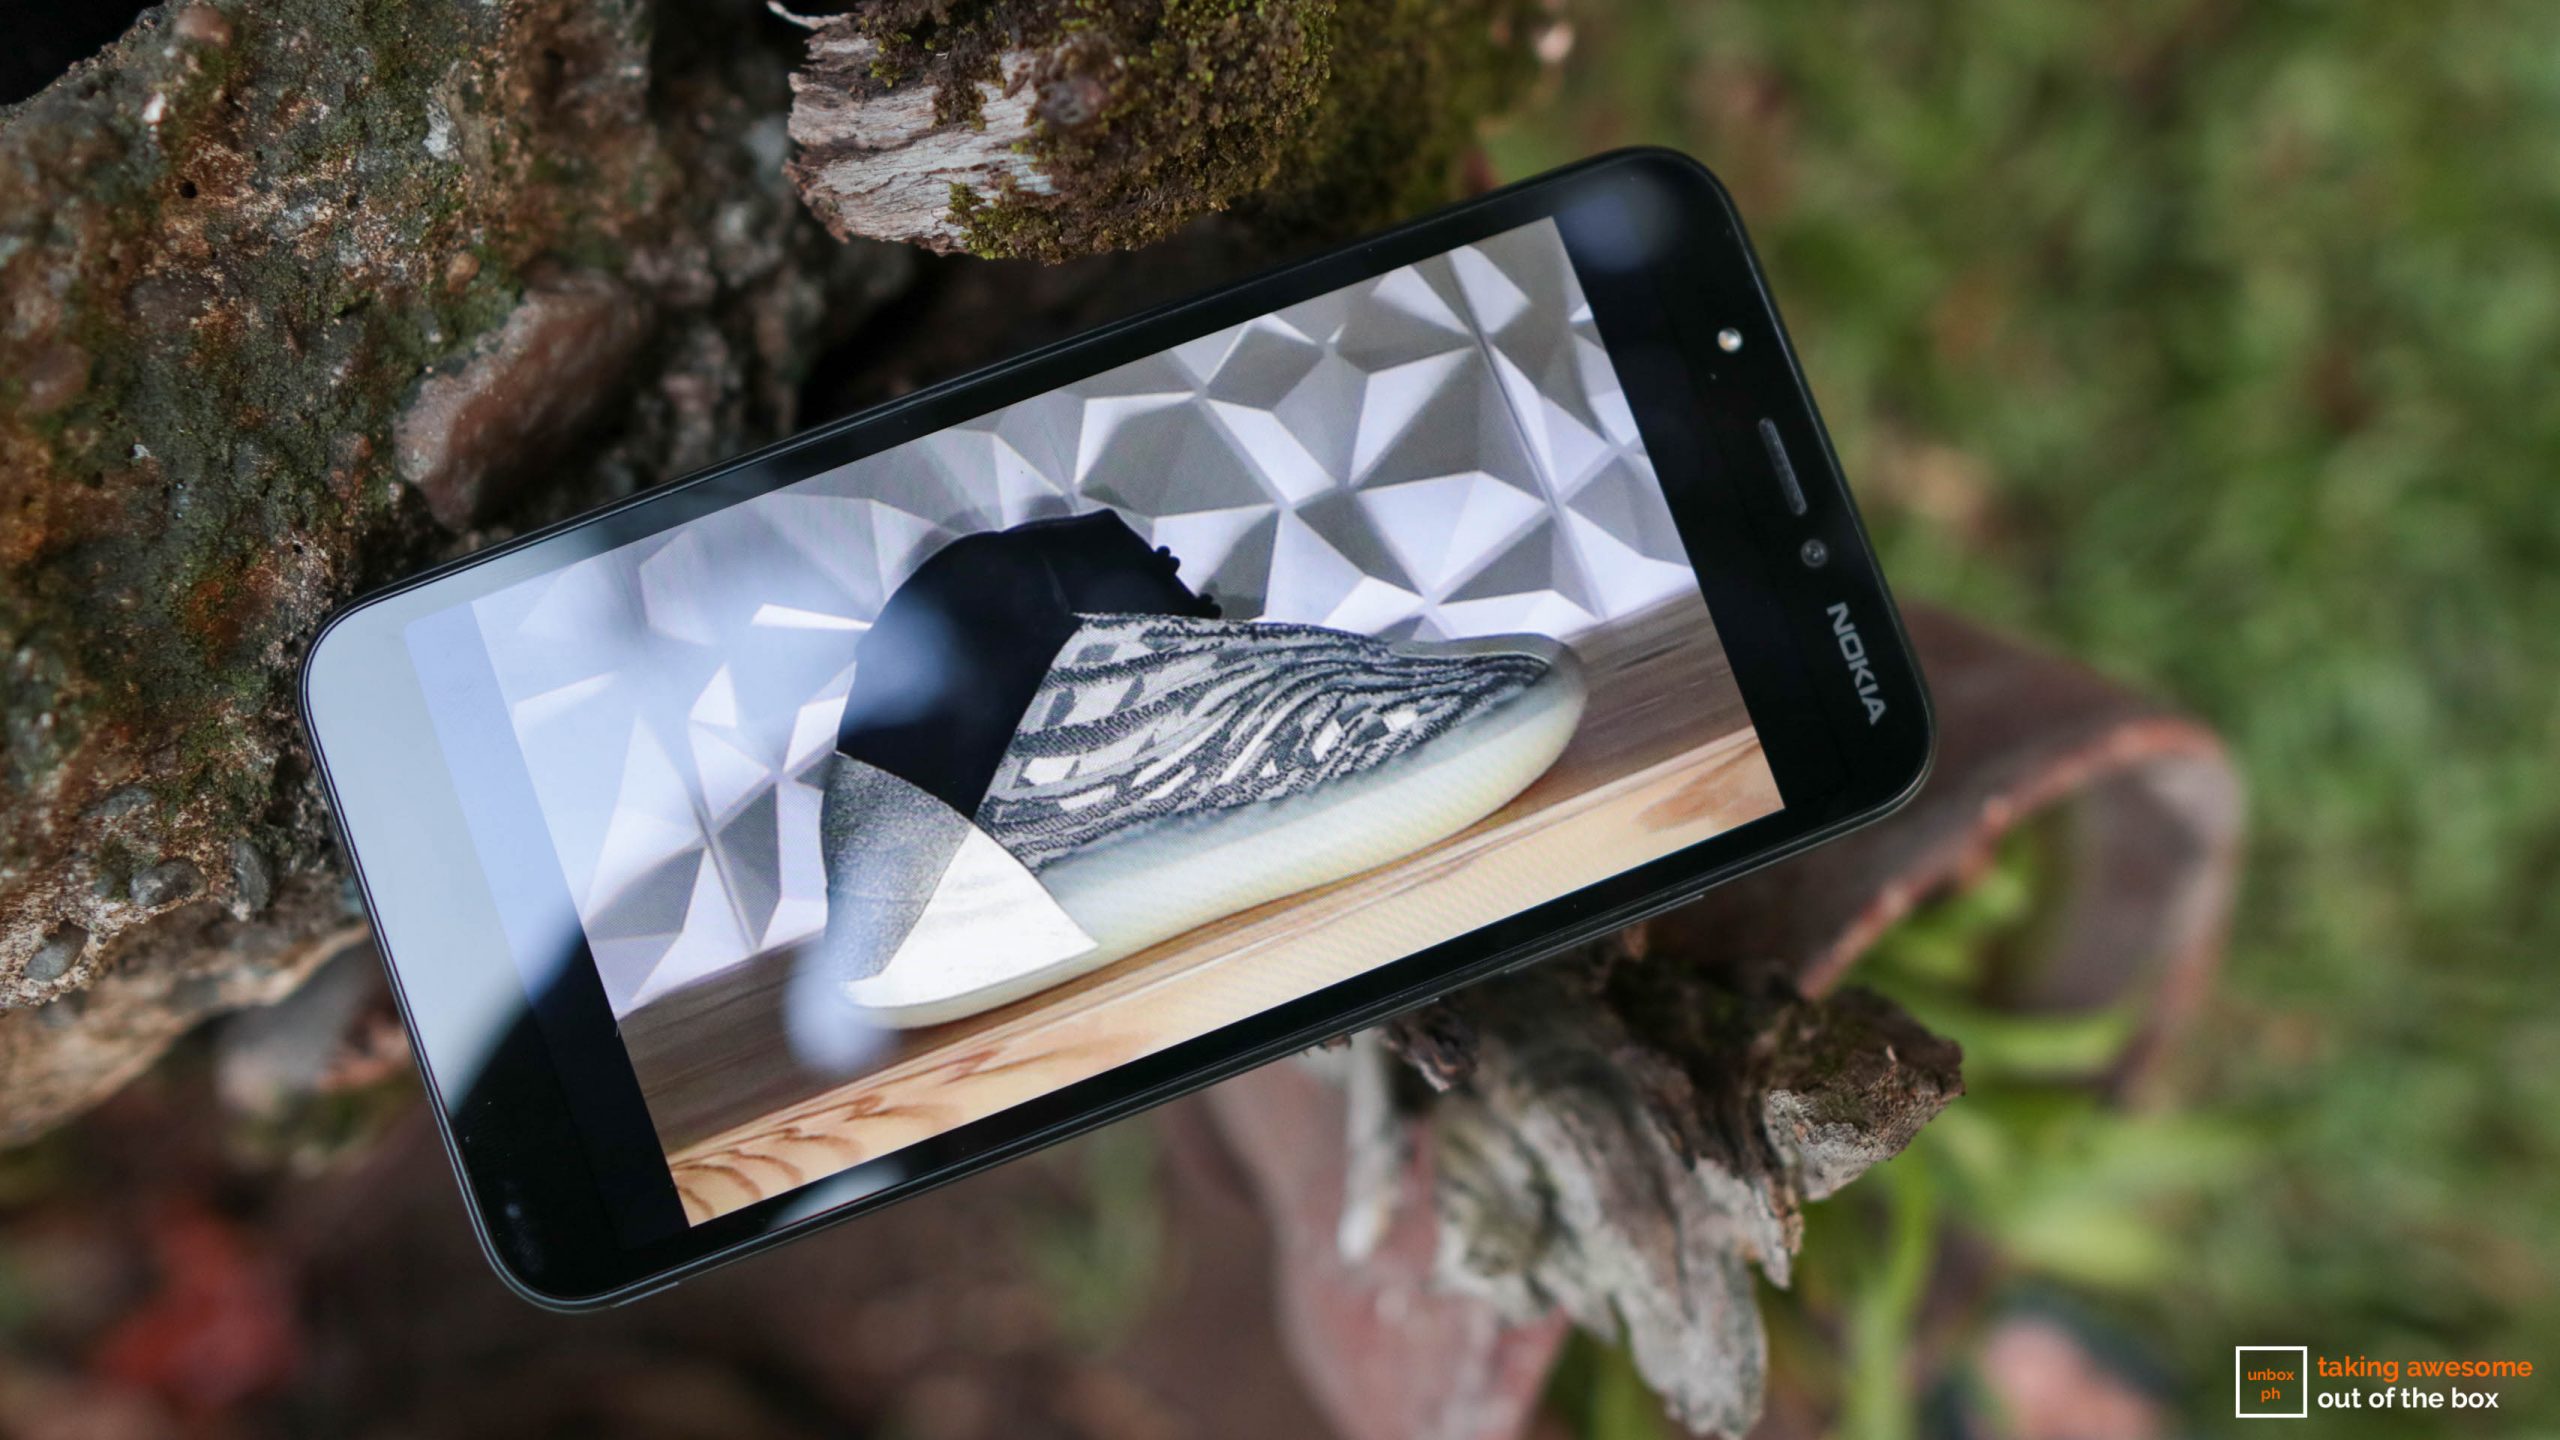 phot of the Nokia C1 showing a photo of a shoe in the screen